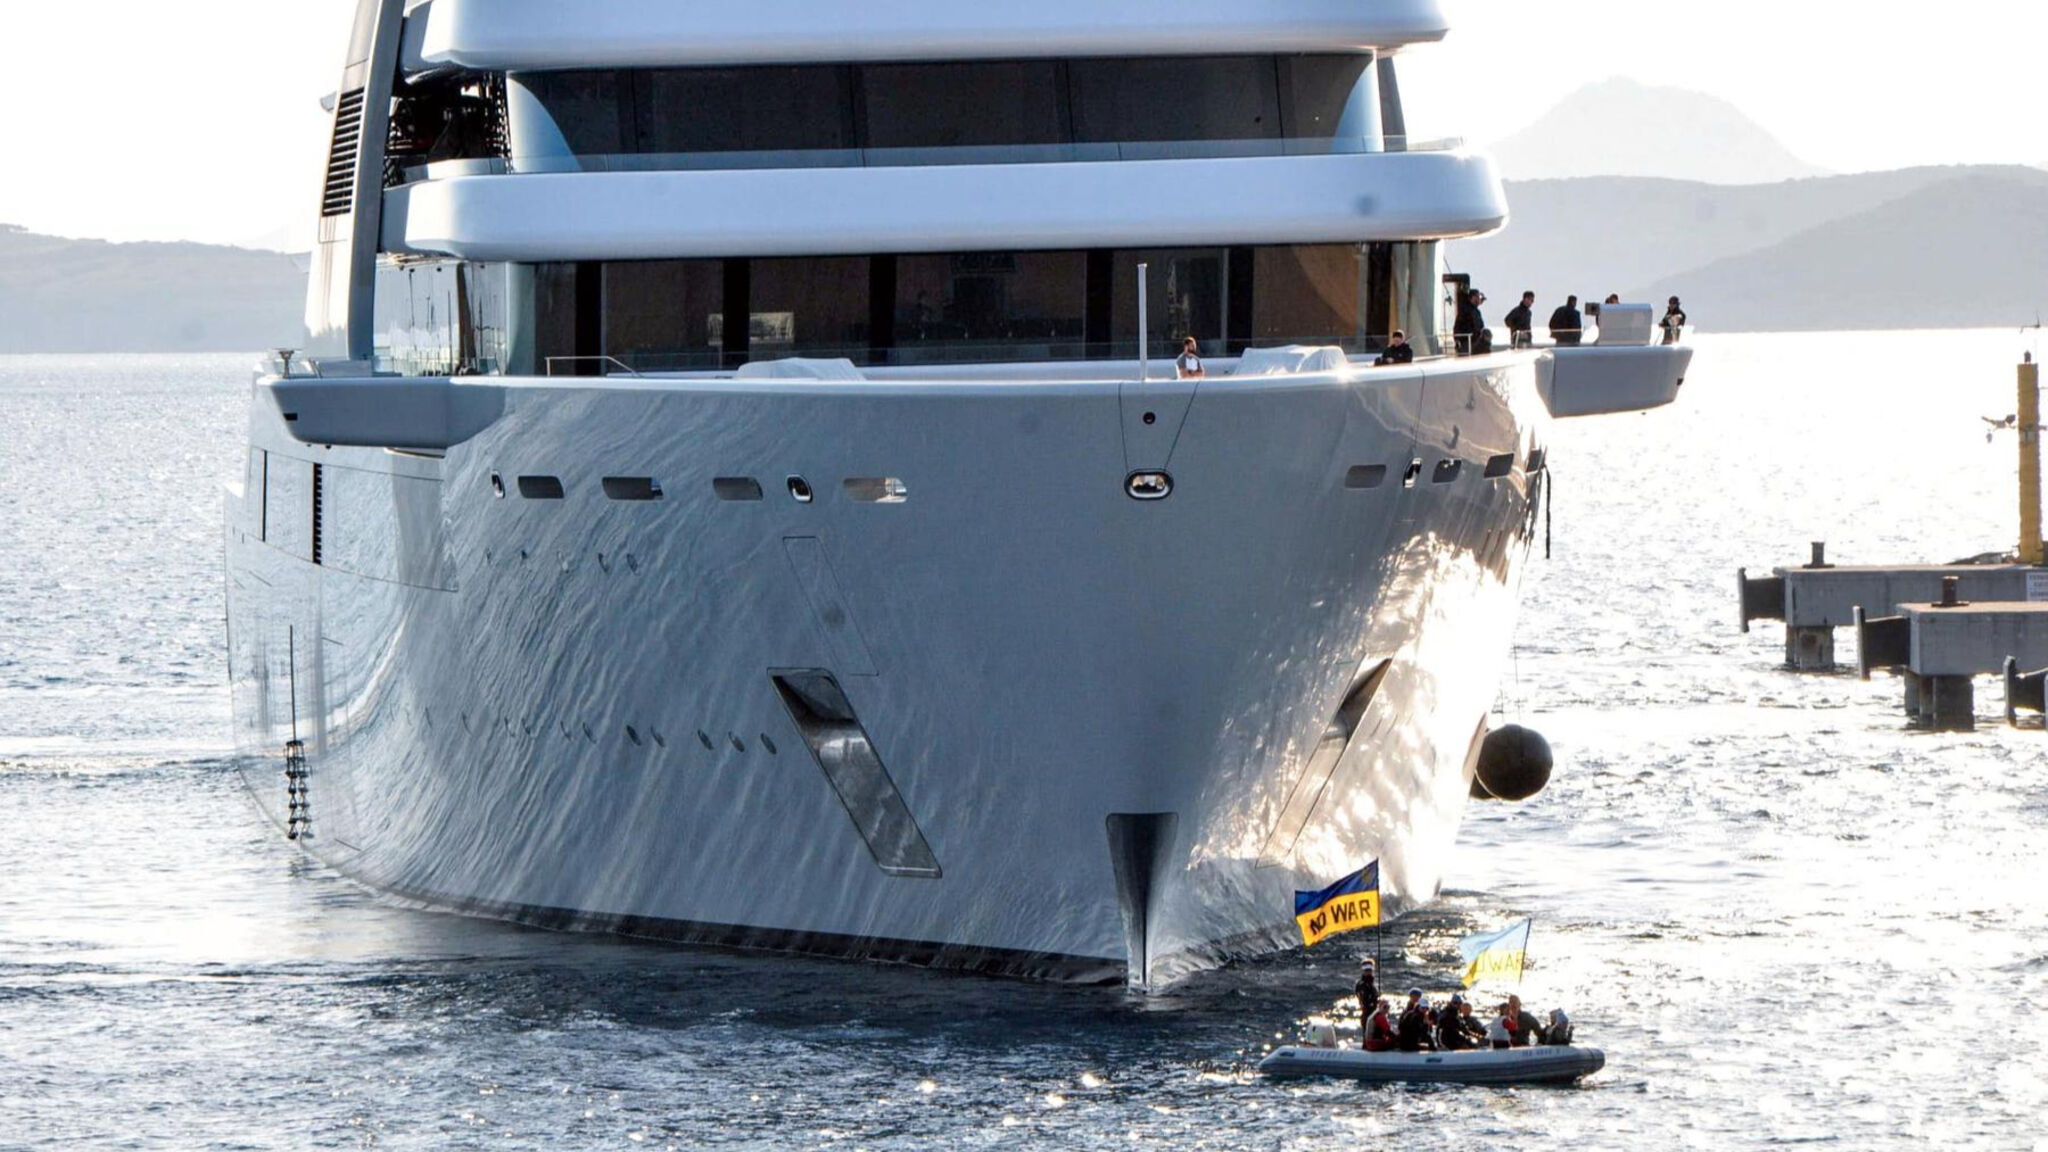 The super yacht has been discontinued - VG